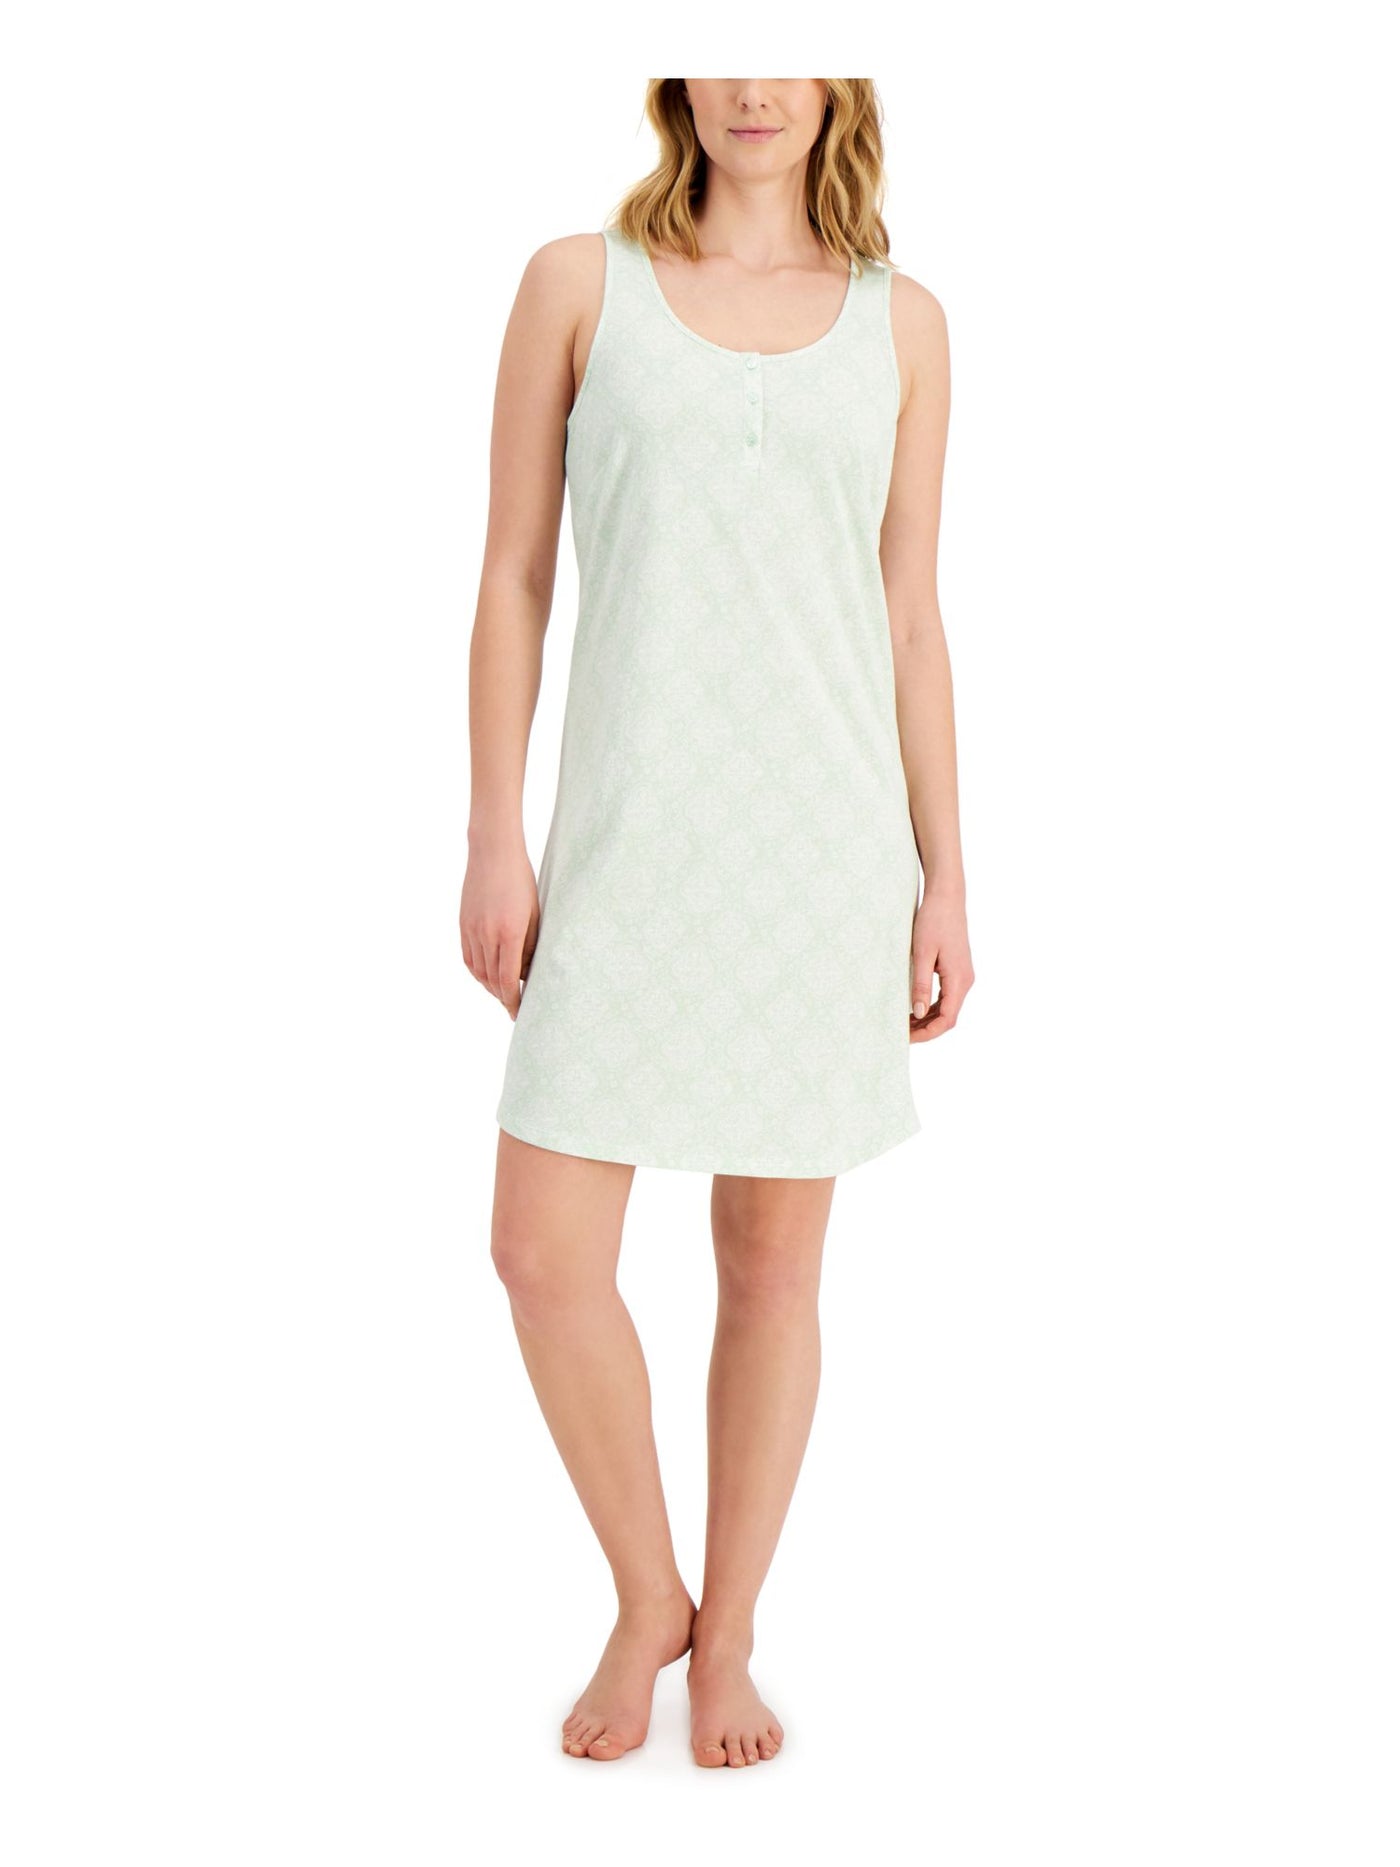 CHARTER CLUB Intimates Green Chemise Nightgown XS